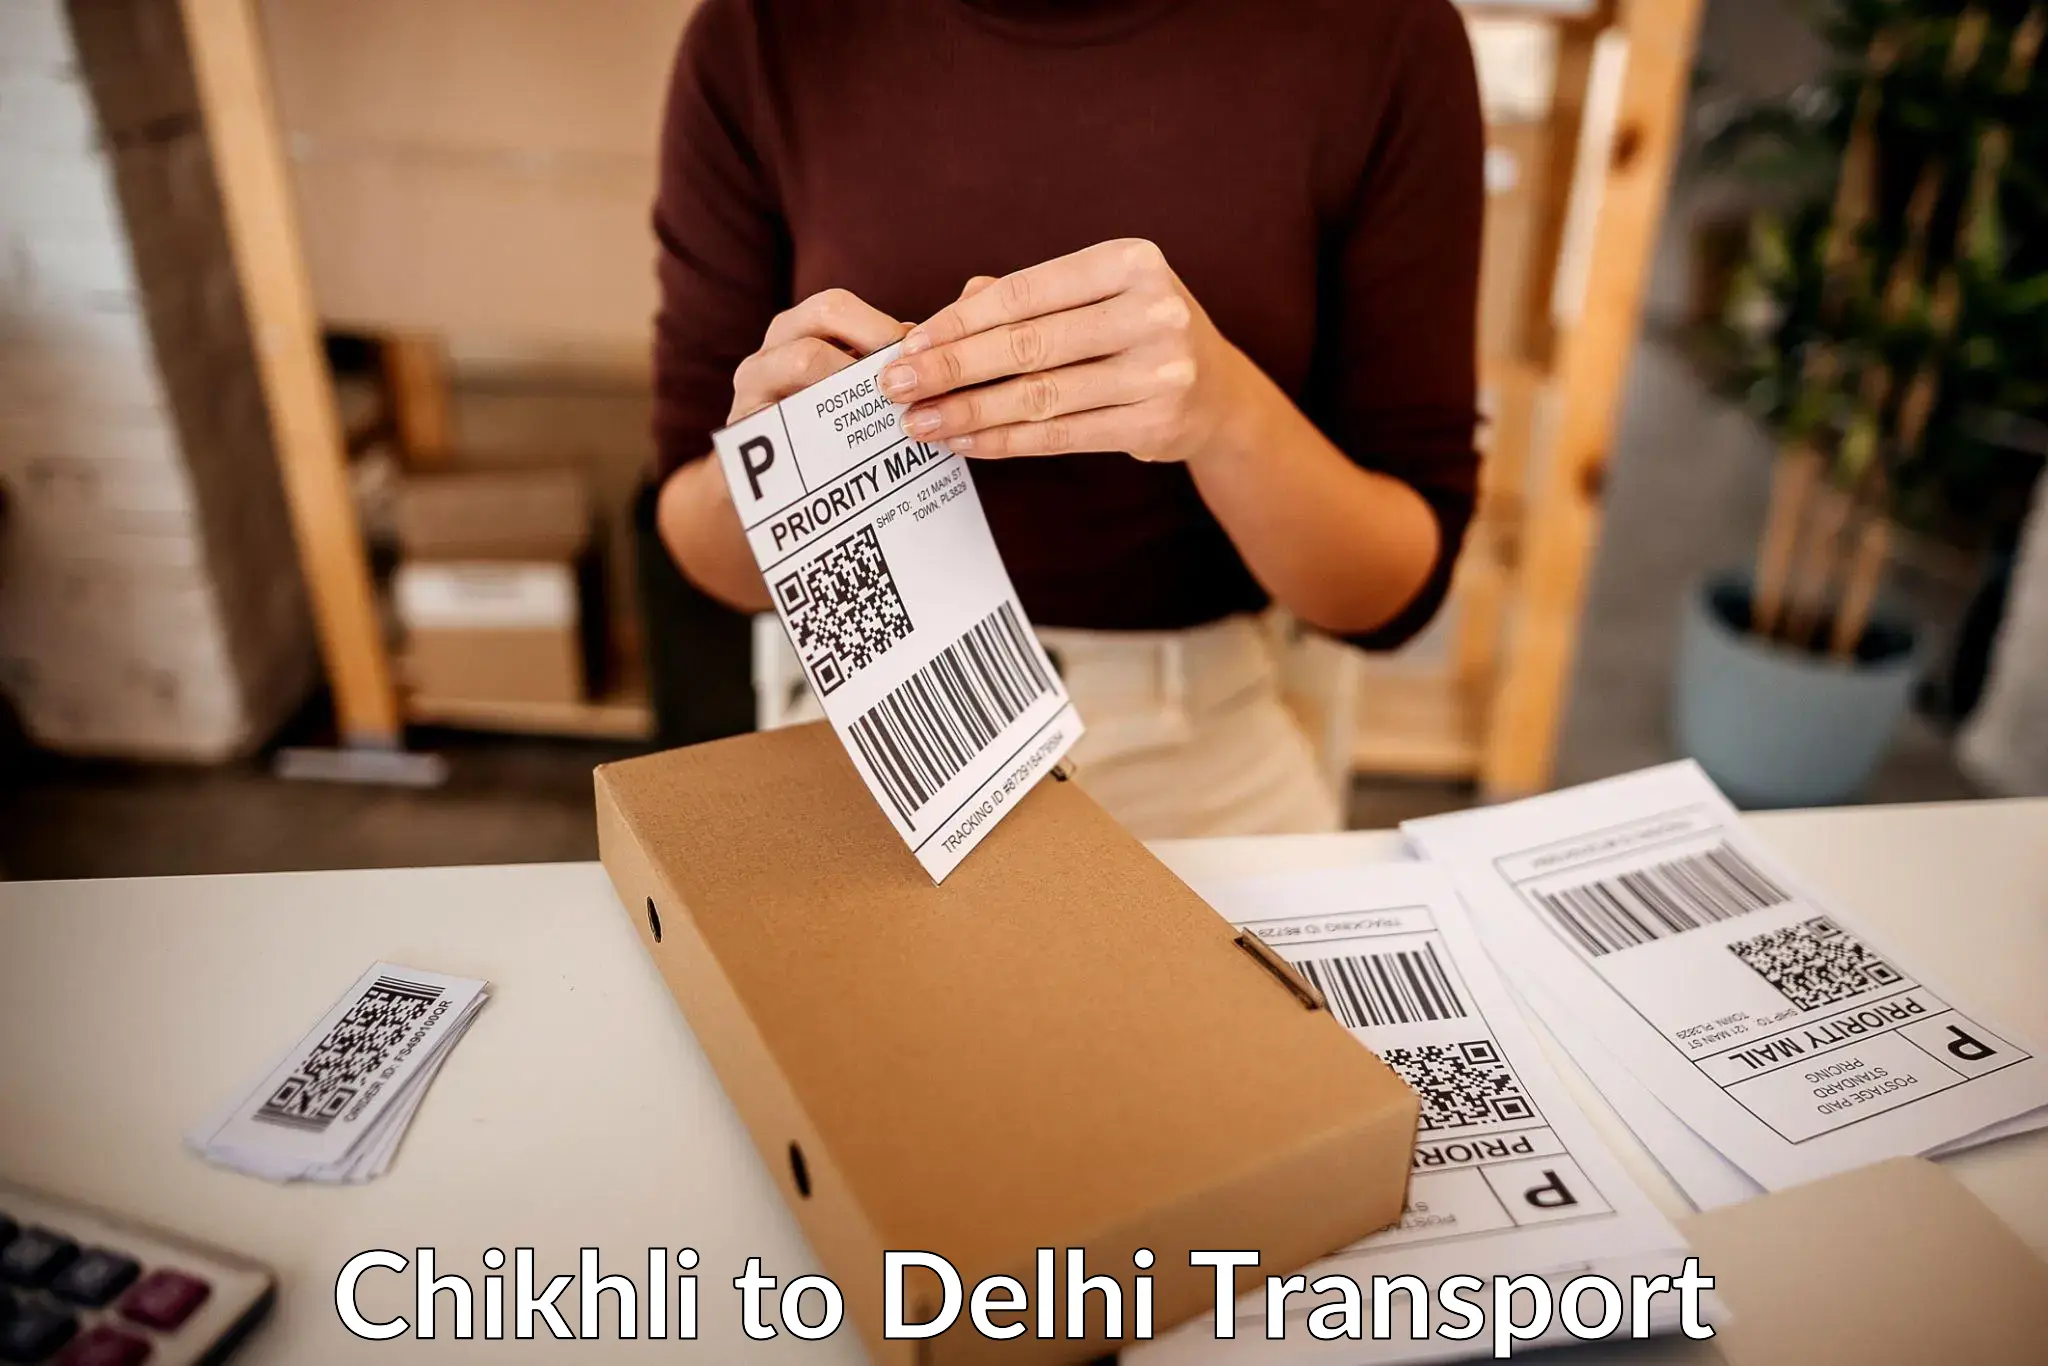 Commercial transport service Chikhli to NCR